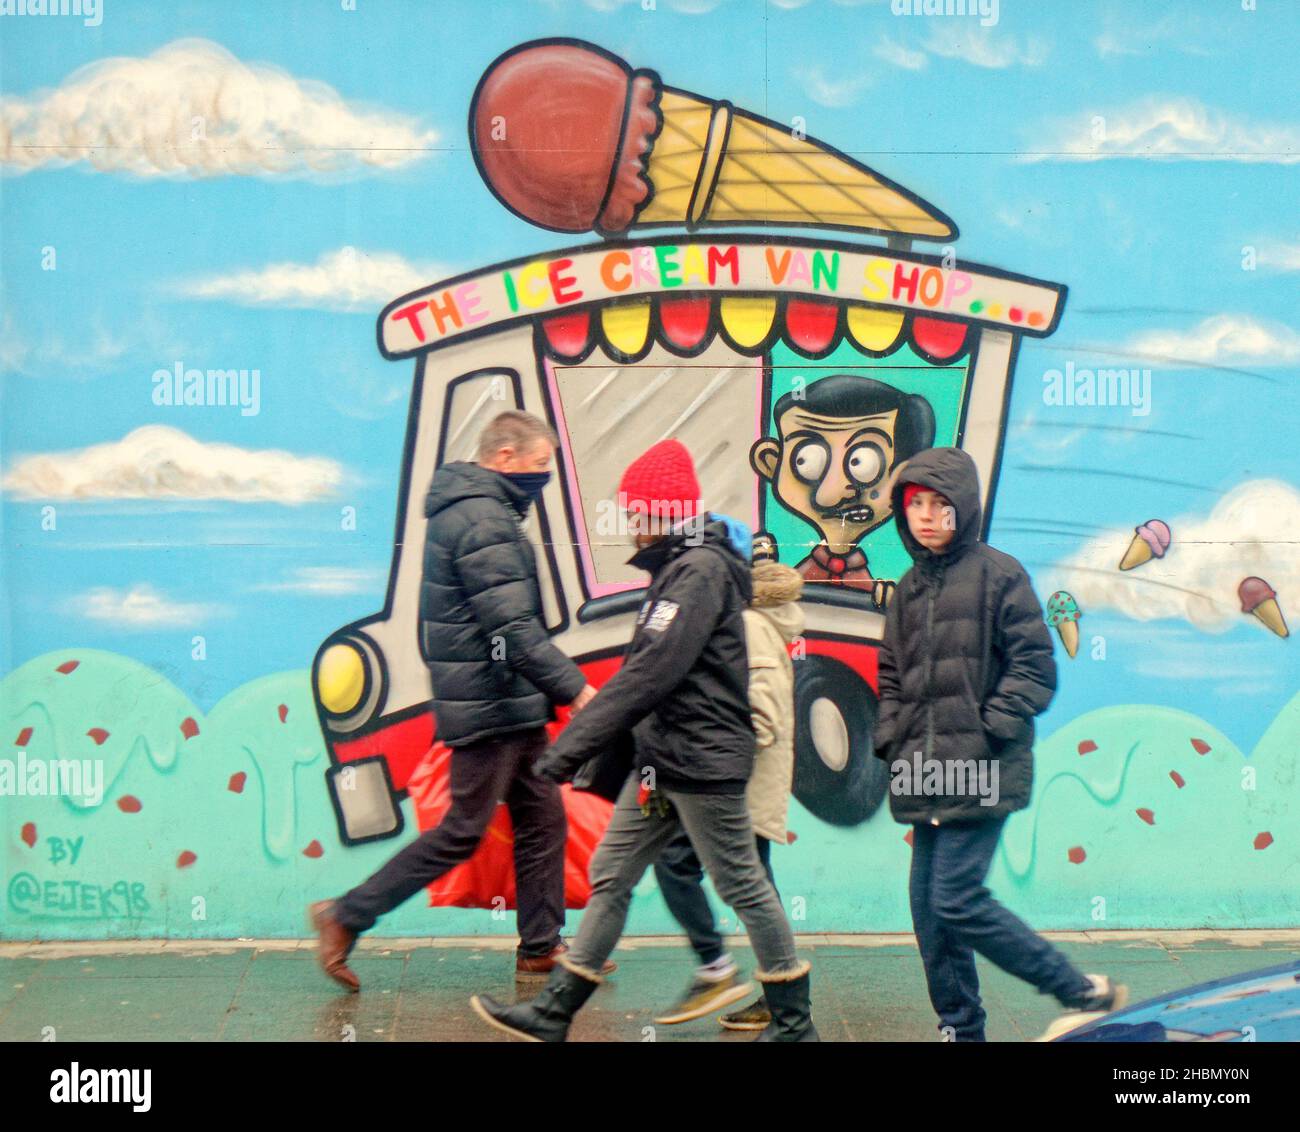 Glasgow, Scotland, UK  20th  December, 2021.  Mr bean ice cream   mural Christmas shopping saw little Christmas cheer on a grey day where lights abd shopping where the only sign of the holiday. Credit  Gerard Ferry/Alamy Live News Stock Photo